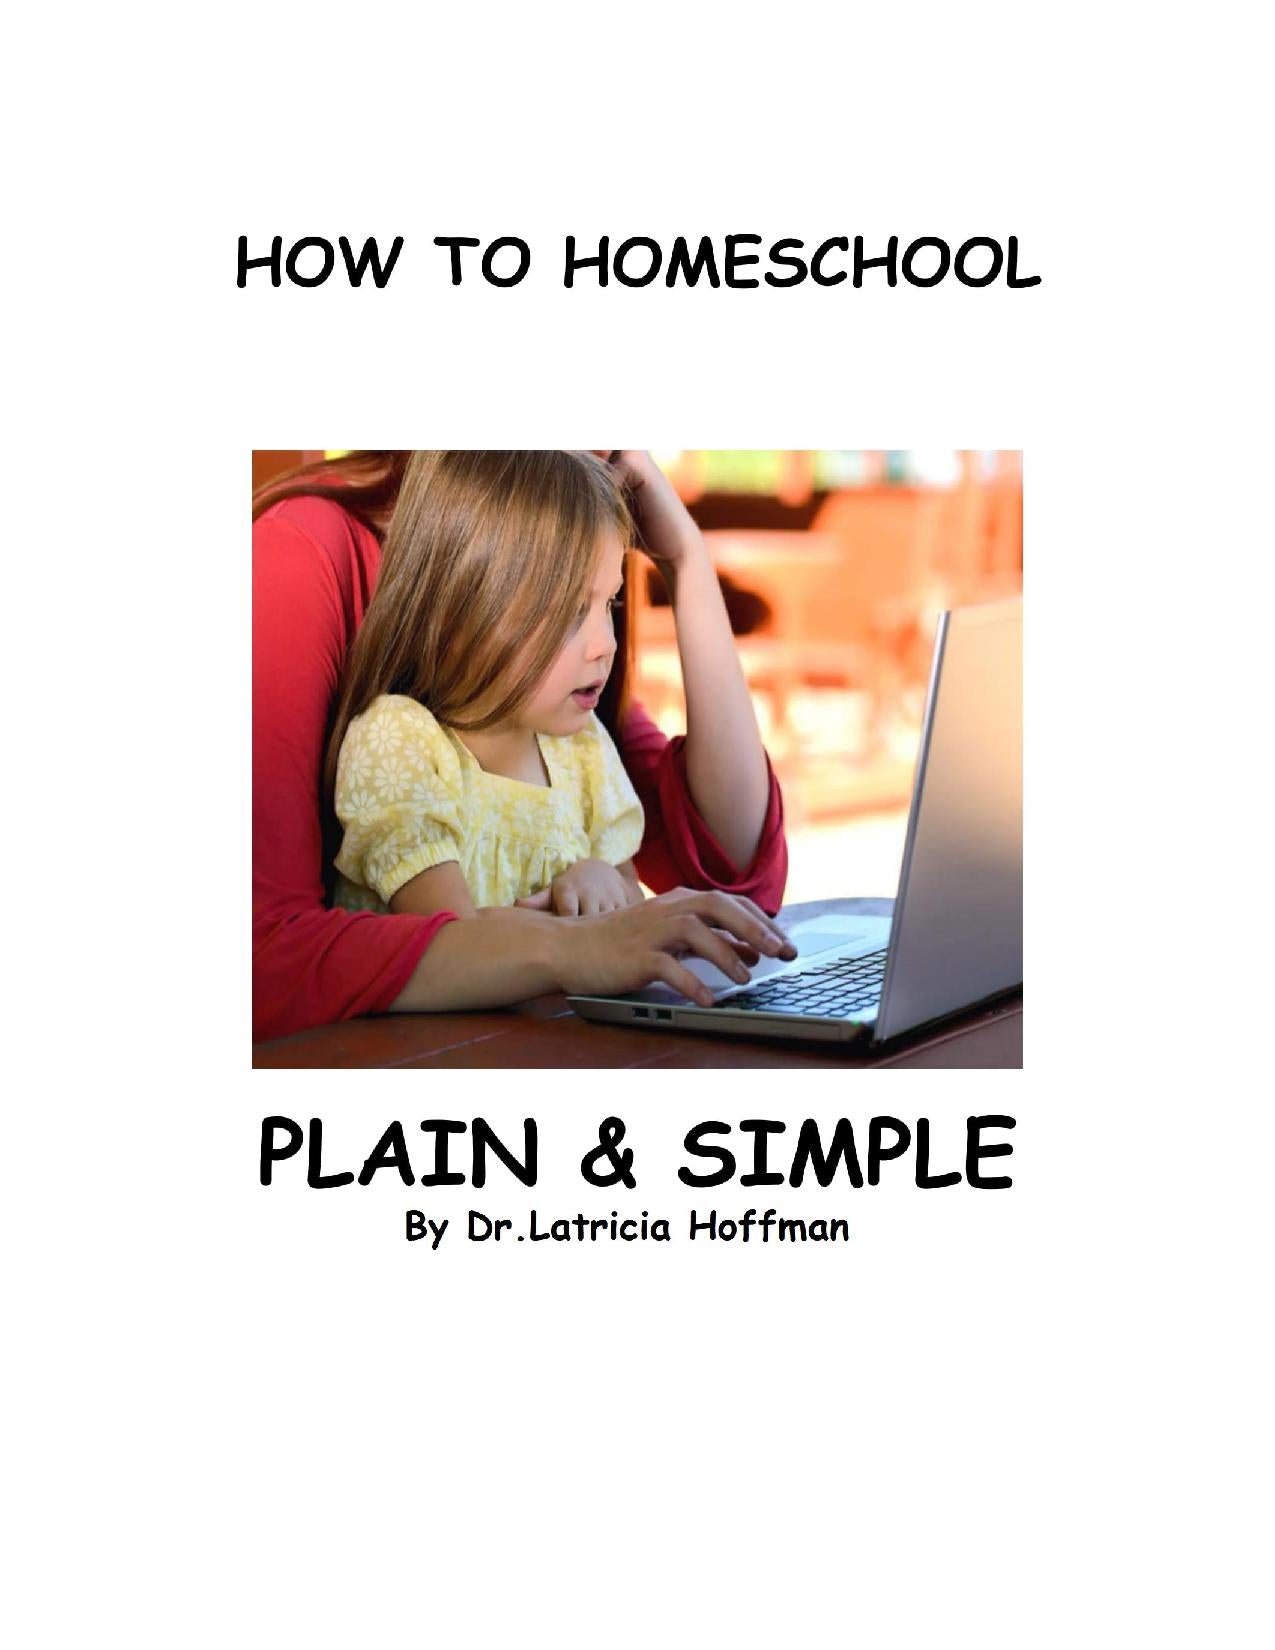 HOW TO HOMESCHOOL: PLAIN AND SIMPLE